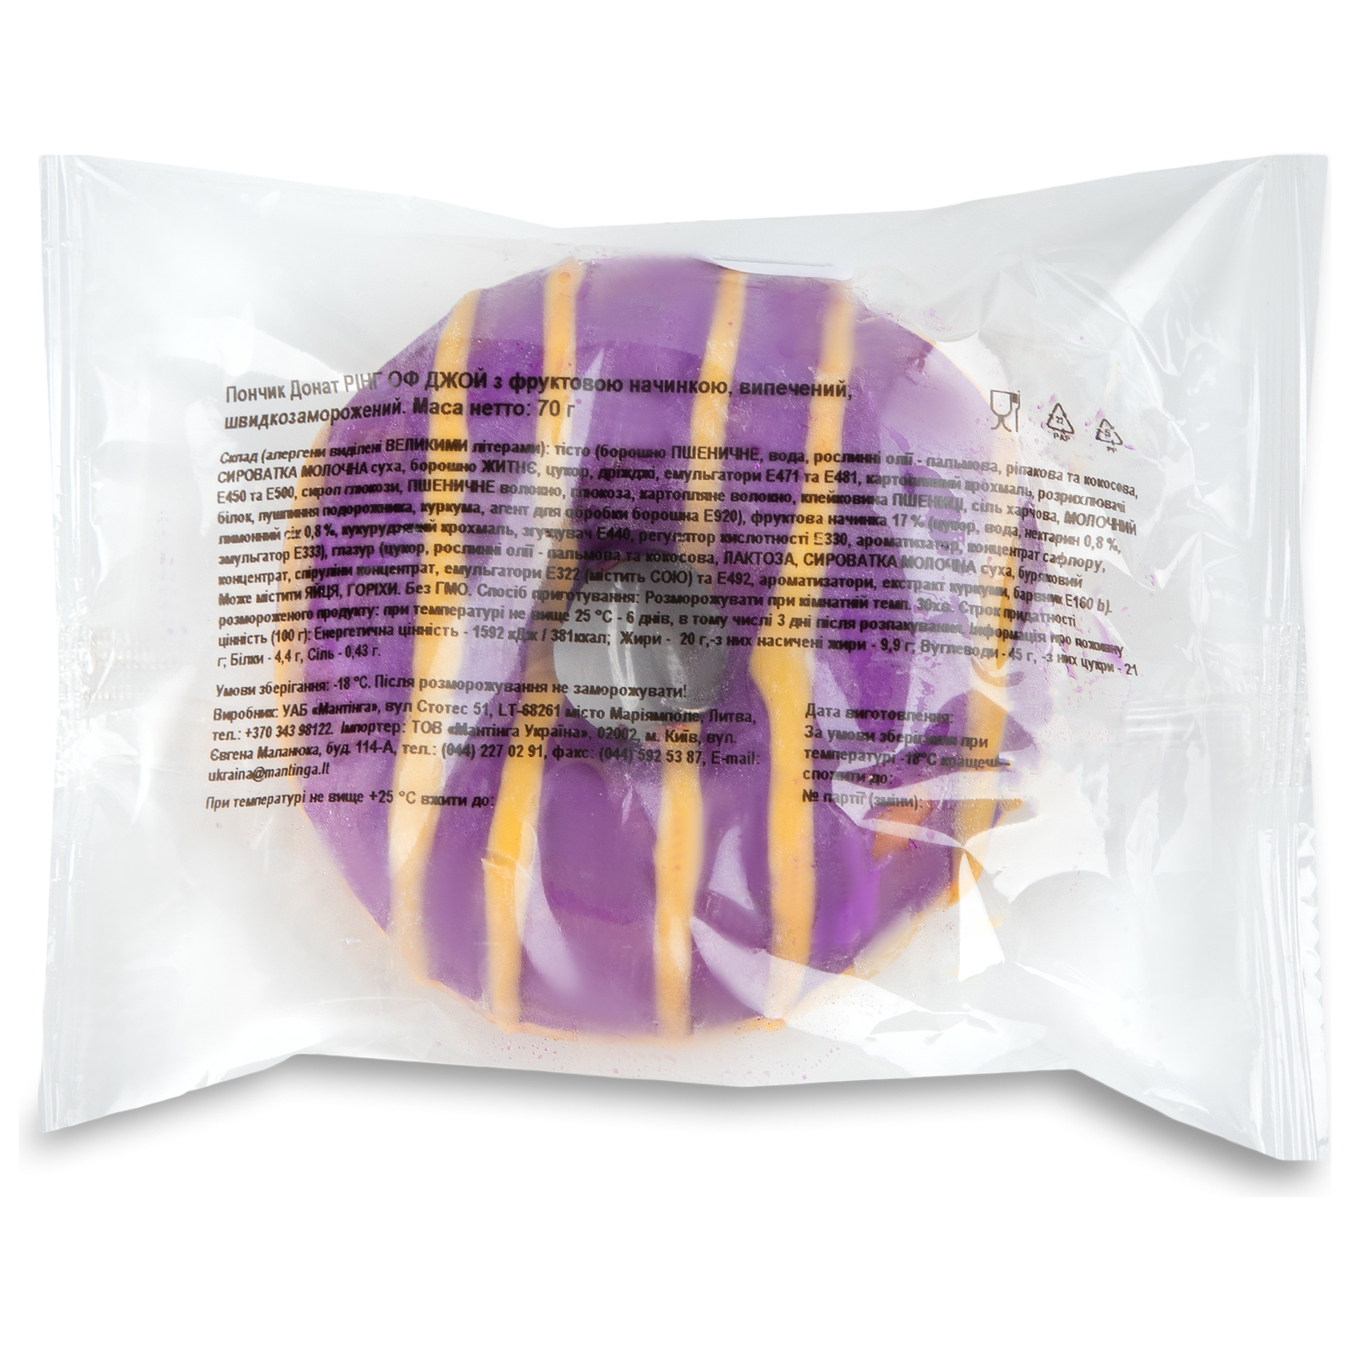 Donut with fruit filling 70g 2